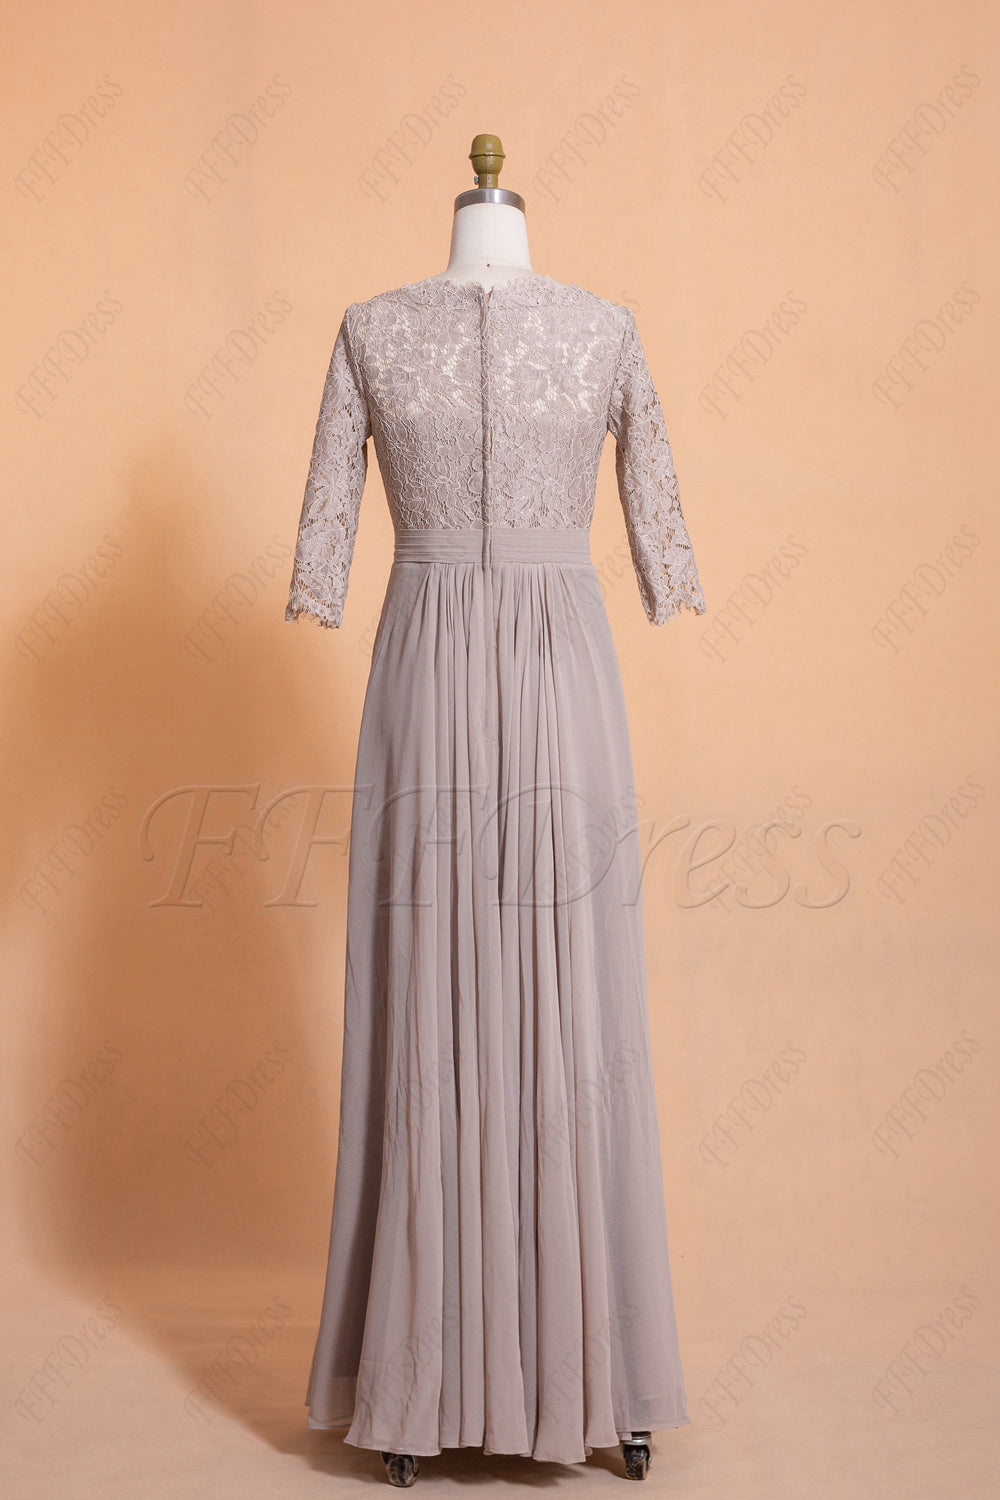 Modest taupe bridesmaid dresses with sleeves